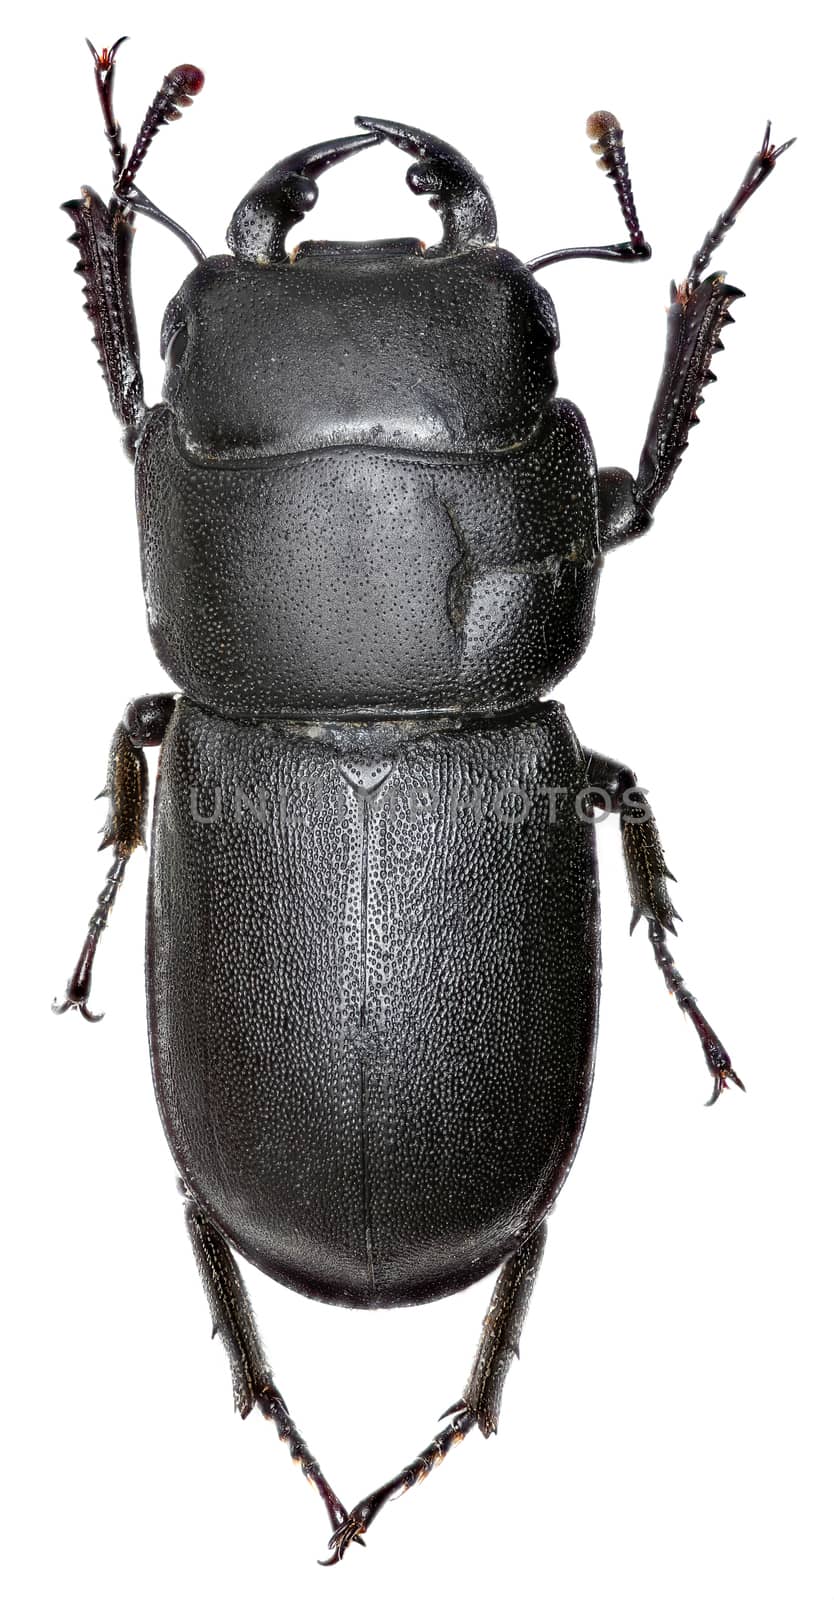 Lesser Stag Beetle on white Background  -  Dorcus parallelipipedus (Linnaeus, 1758) by gstalker